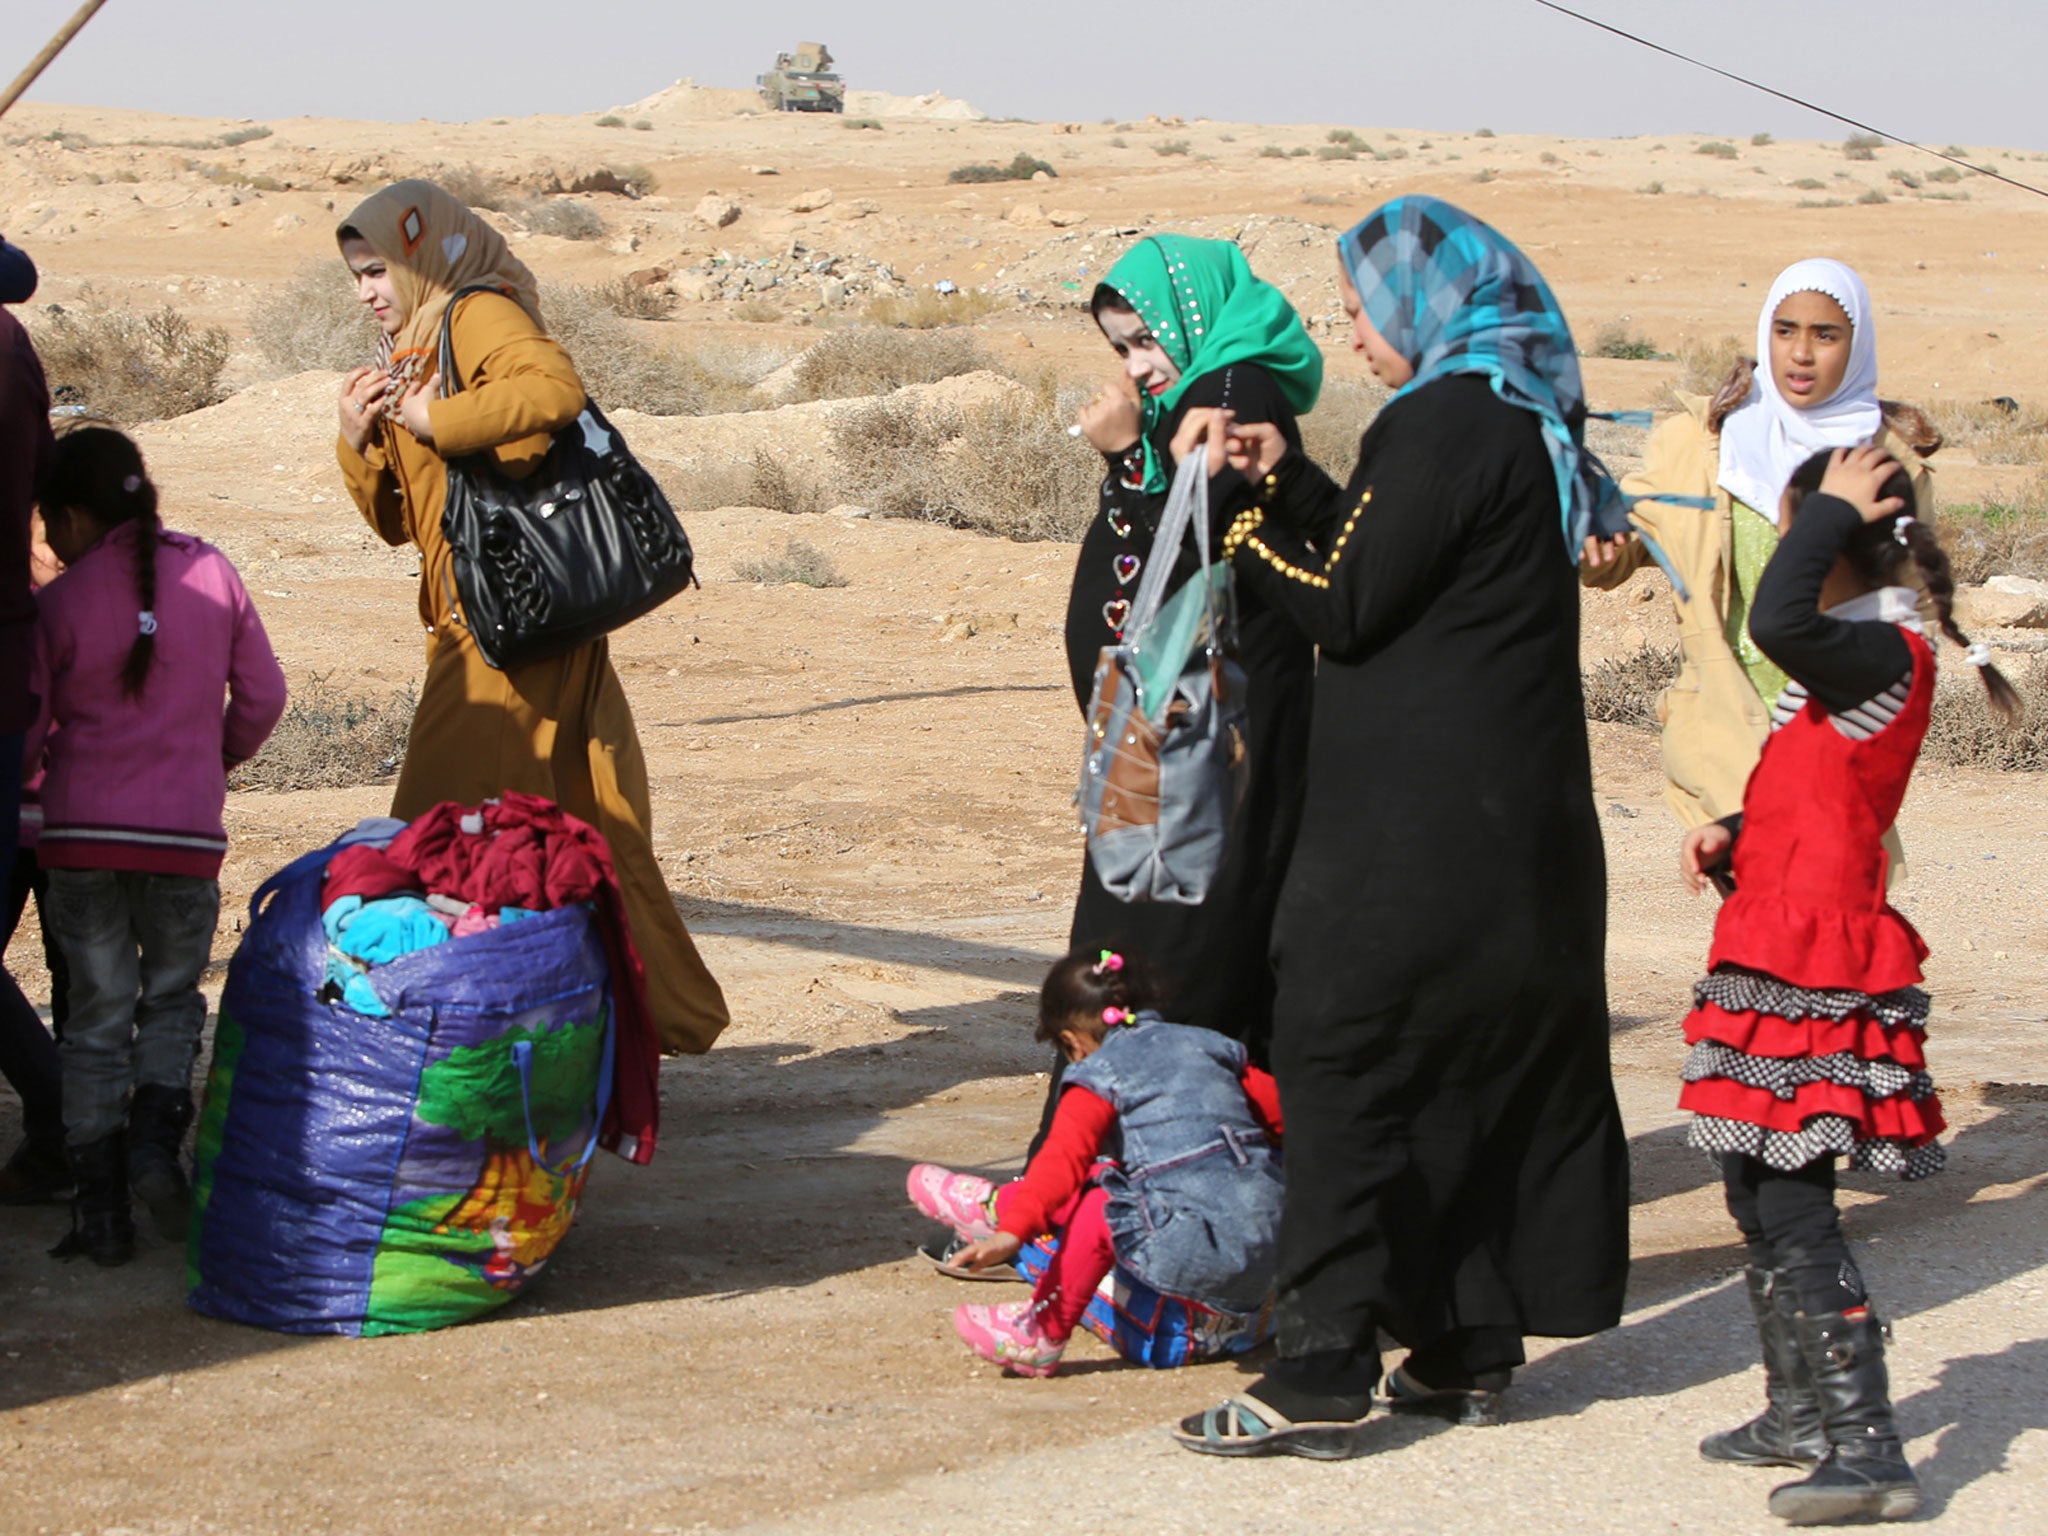 Iraqi women and children flee Anbar in early January, as part of the 140,000 who have left the province